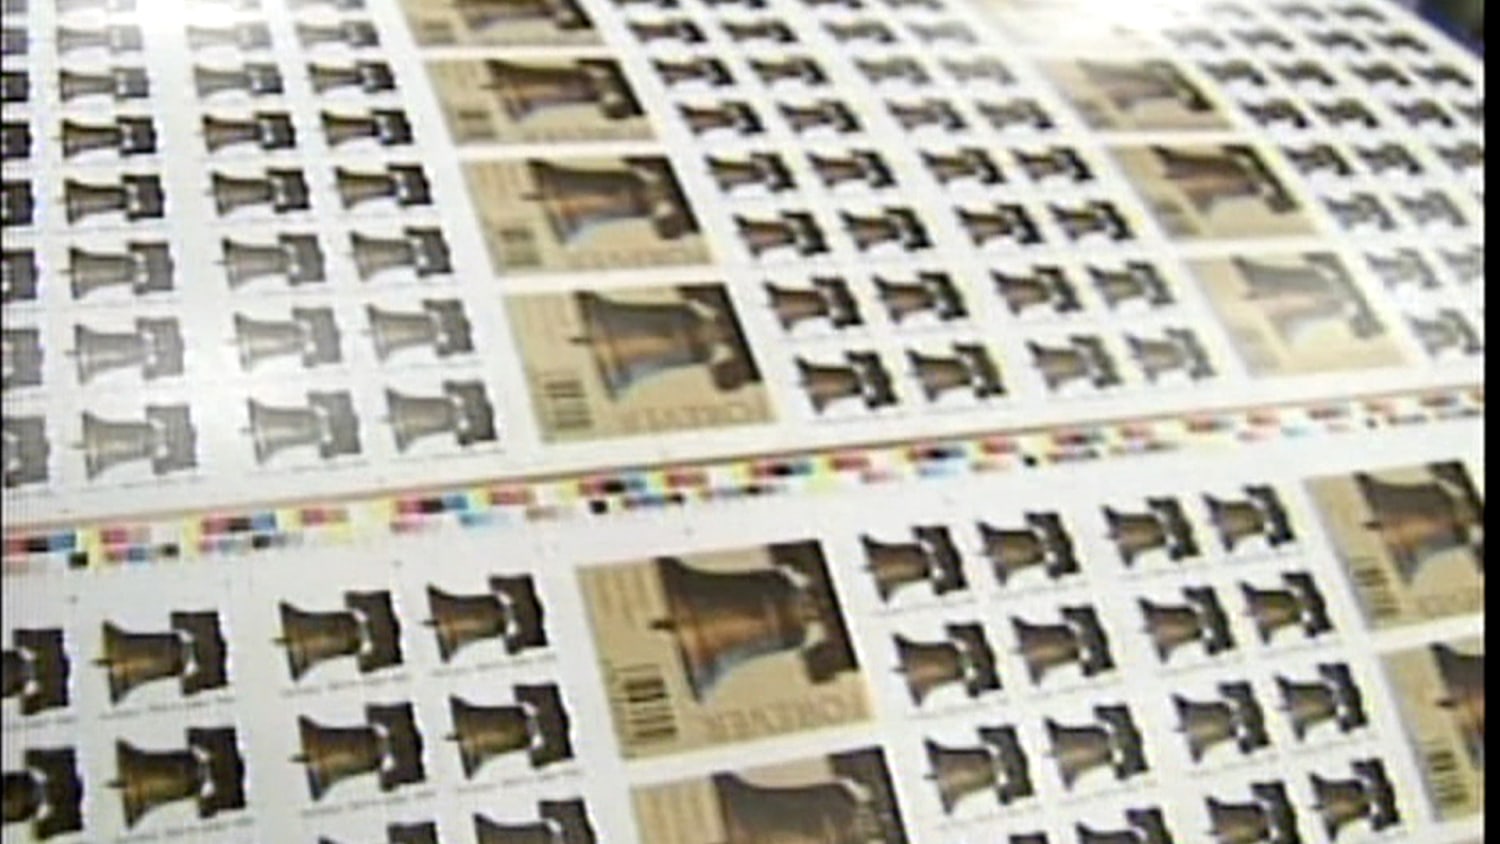 USPS Wants to Raise Price of First-Class Postage Stamps